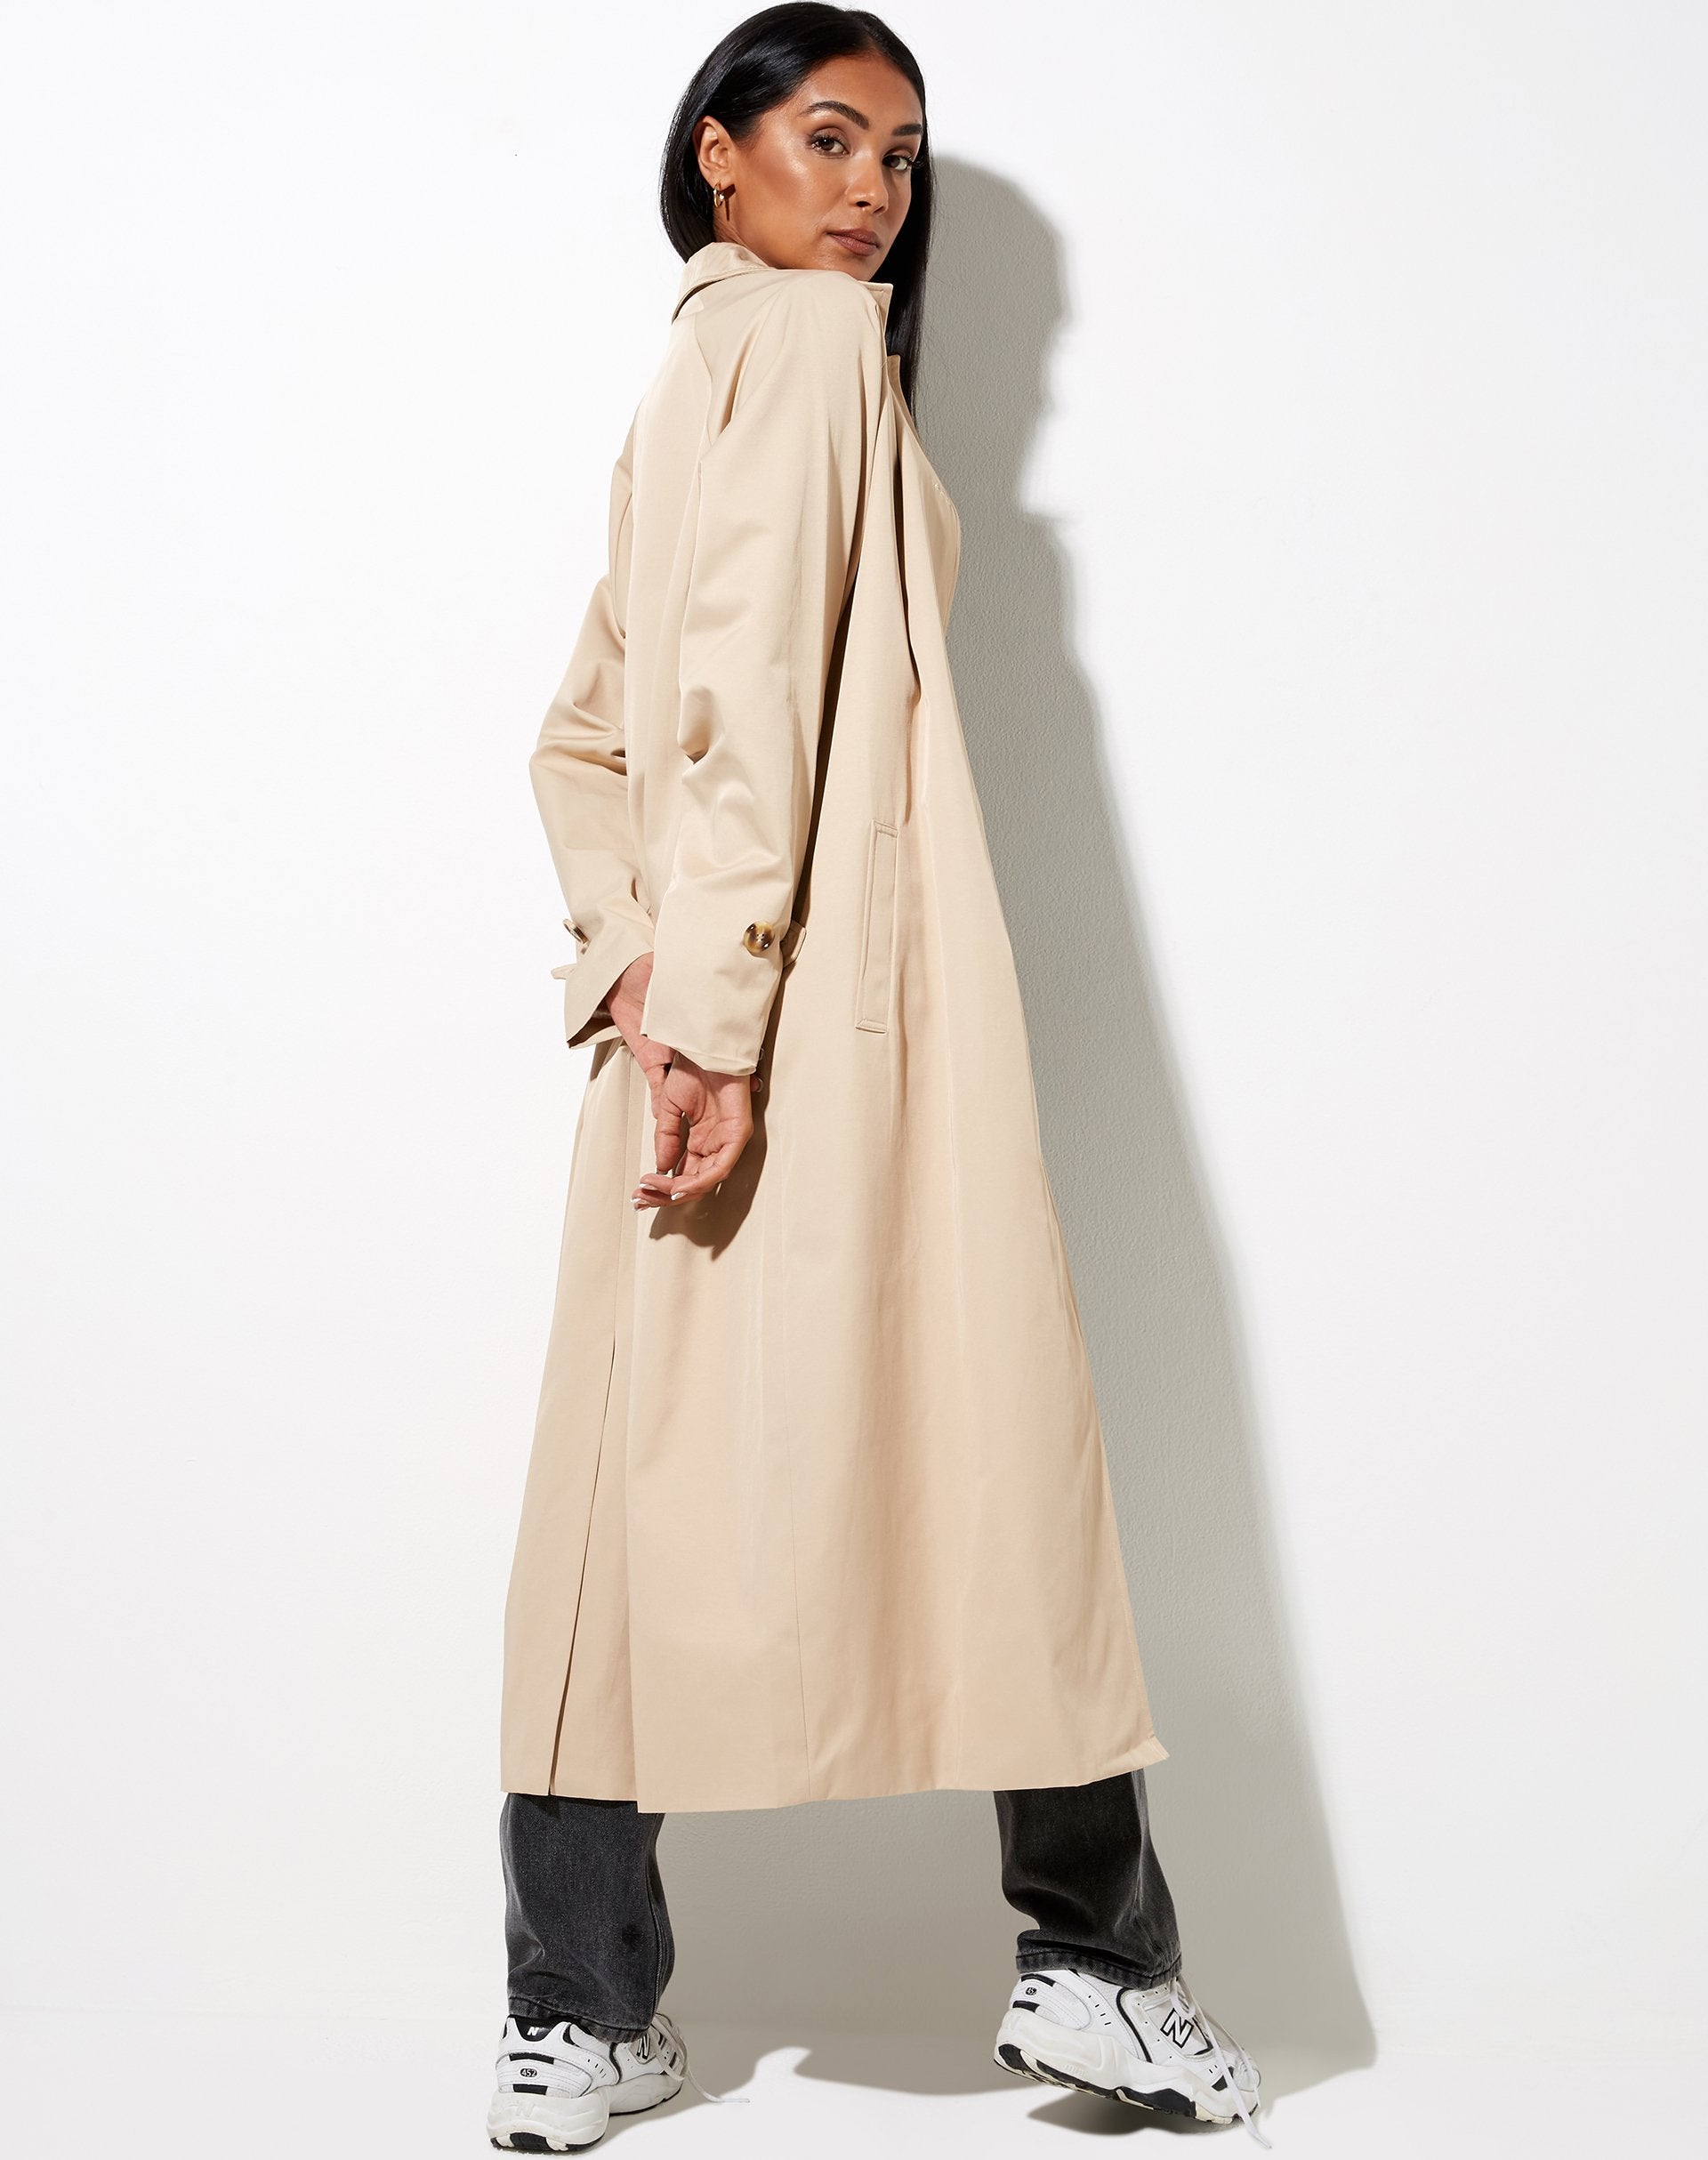 Image of Assa Trench Coat in Beige with Stripe Lining